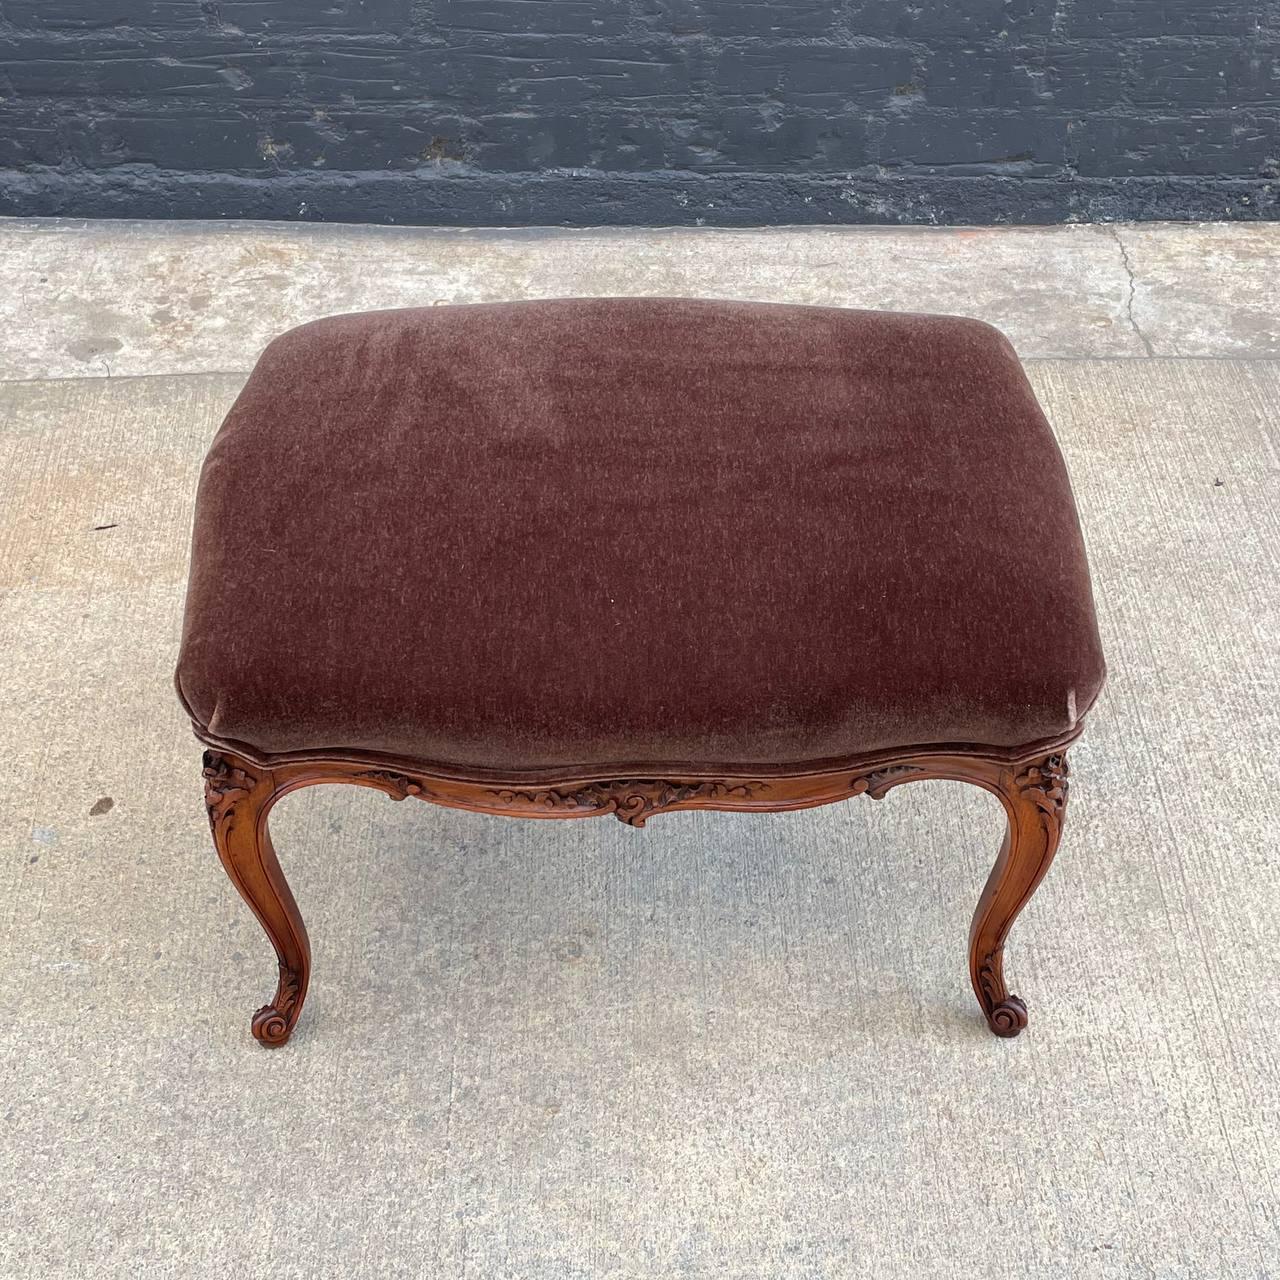 Antique French Louis XVI carved wood & Mohair stool

Designer: Unknwon
Country: France
Manufacturer: Unknown
Materials: Carved Wood, Leather
Style: French Louis XVI
Year: 1920s

$1,295 

Dimensions:
17.50”H x 28”W x 22”D.